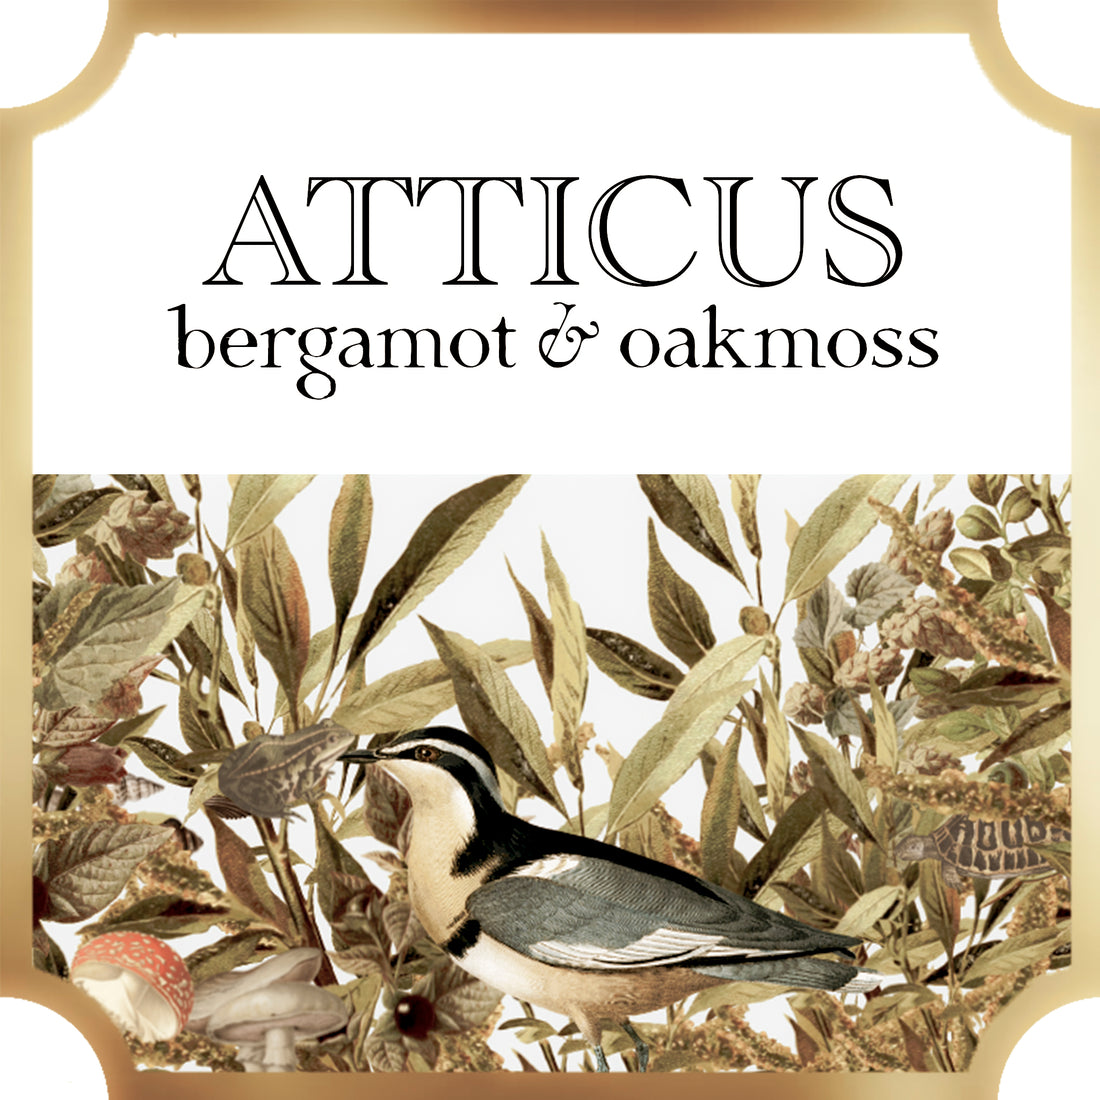  atticus collection a pleasant thought